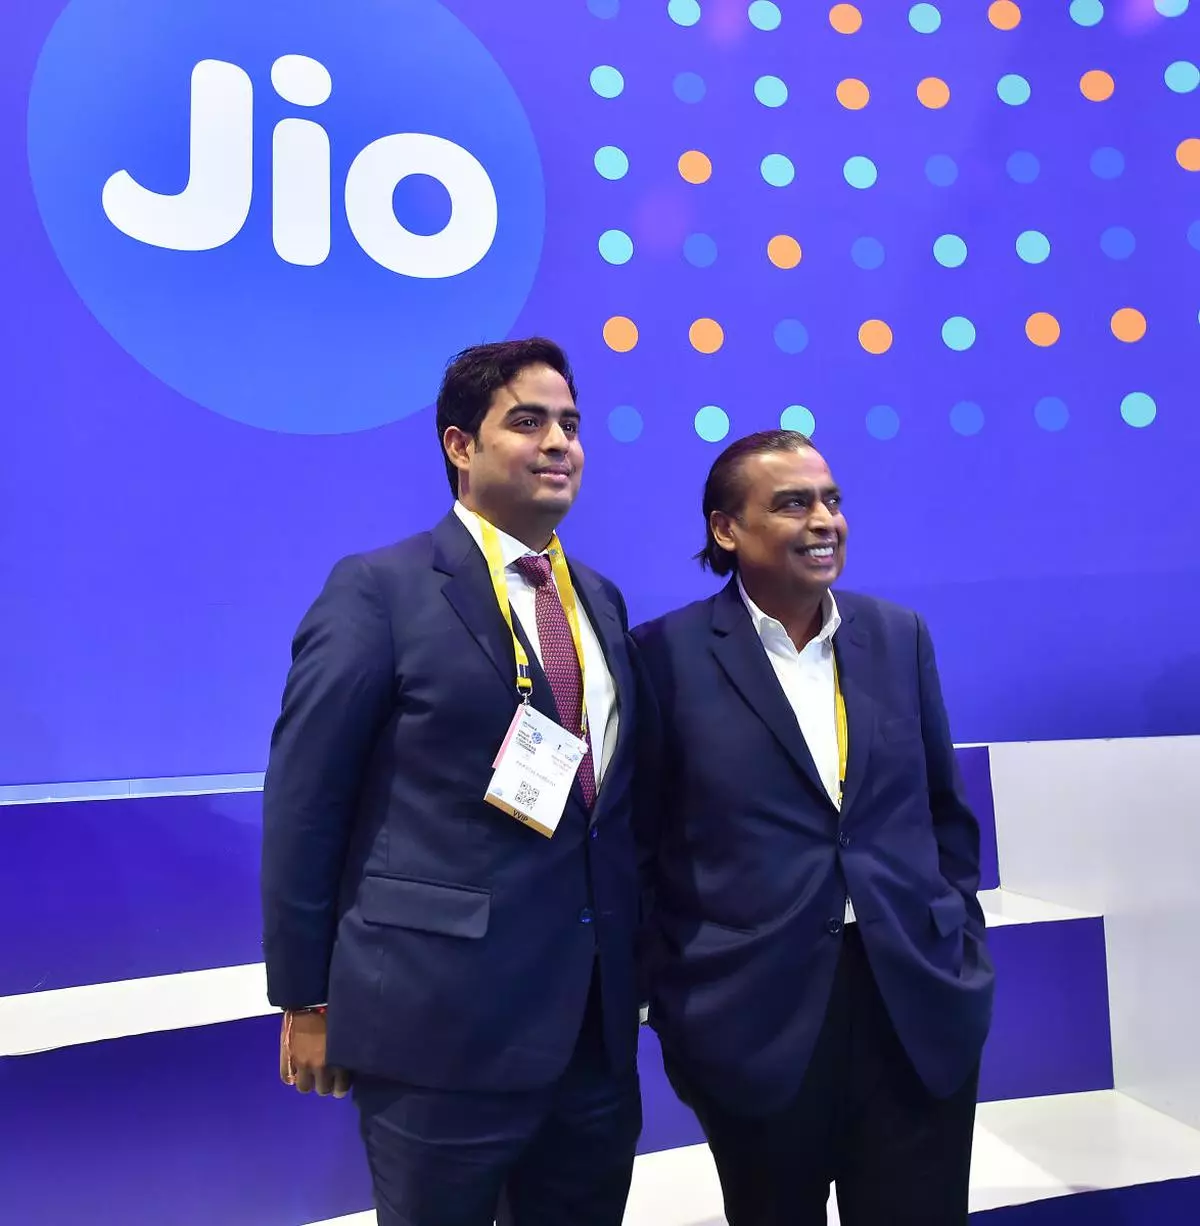 Reliance Industries Ltd Chairman Mukesh Ambani with his son Akash Ambani at Reliance Jio‘s stall during the inaugural ceremony of India Moblie Congress 2022, and launch of 5G services, at Pragati Maidan in New Delhi on Saturday, October 1, 2022. (SHIV KUMAR PUSHPAKAR/The Hindu)